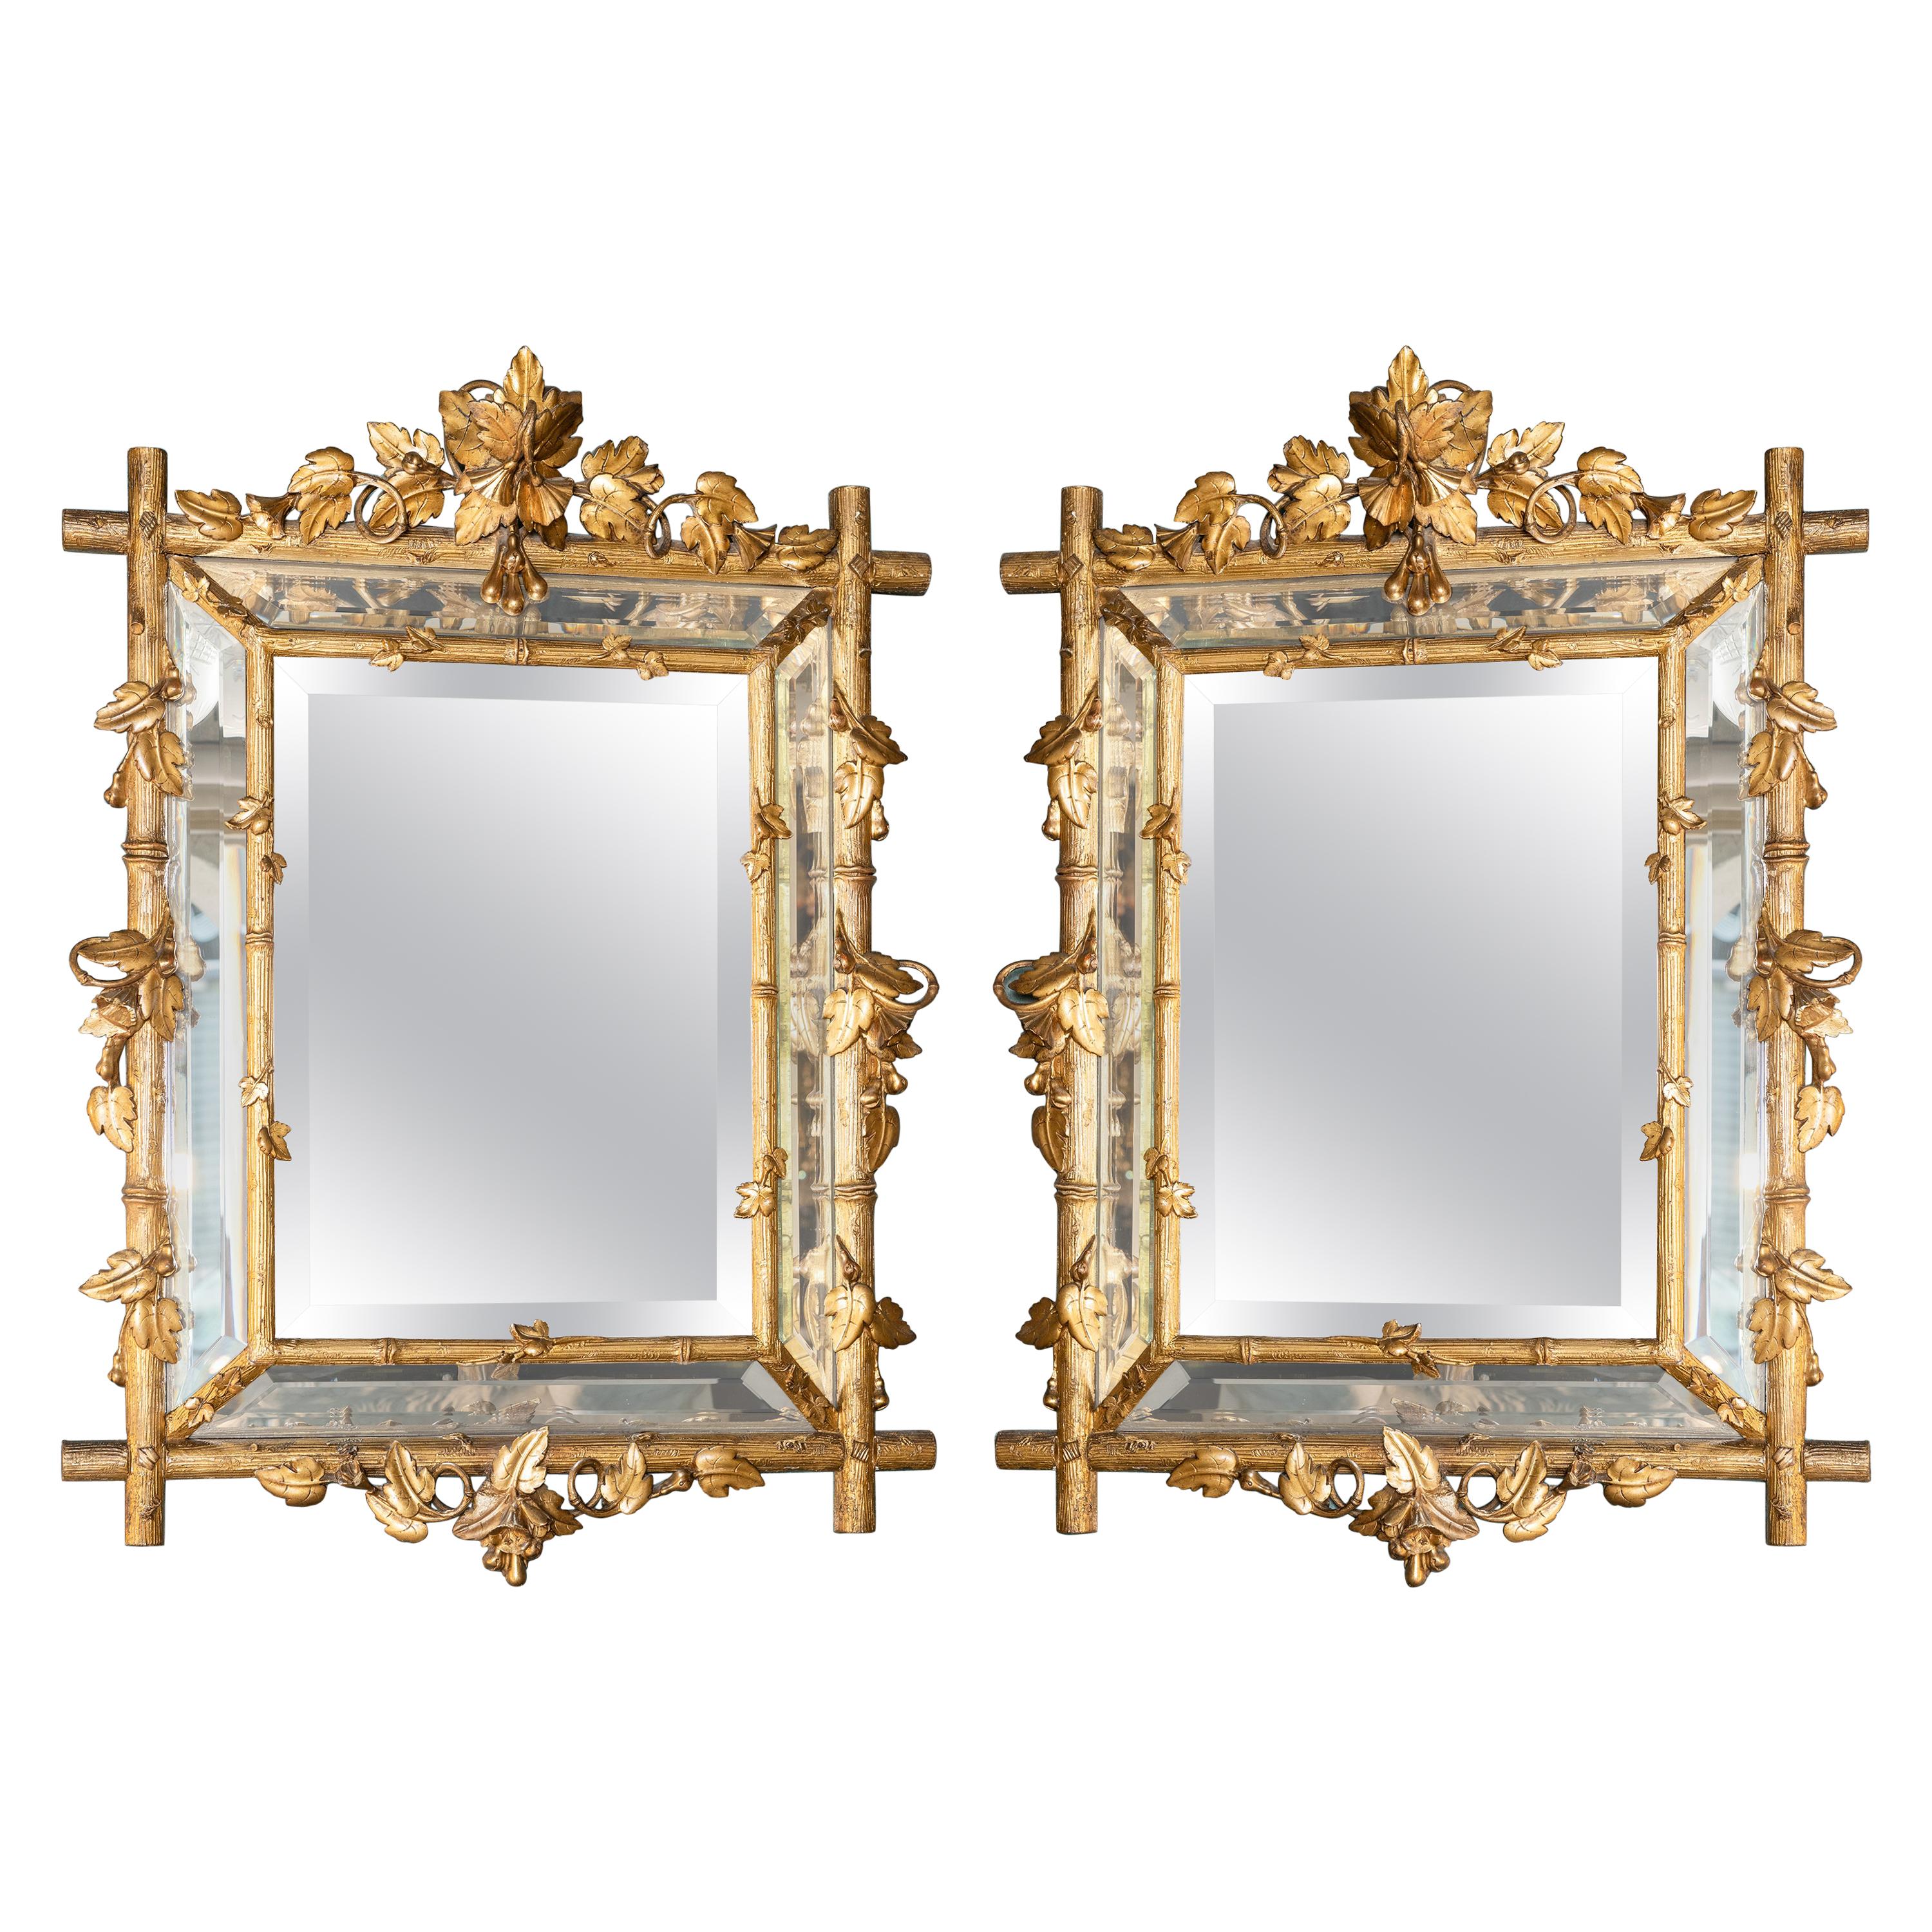 Pair of Gold Patinated Wood Mirrors, England, Late 19th Century For Sale